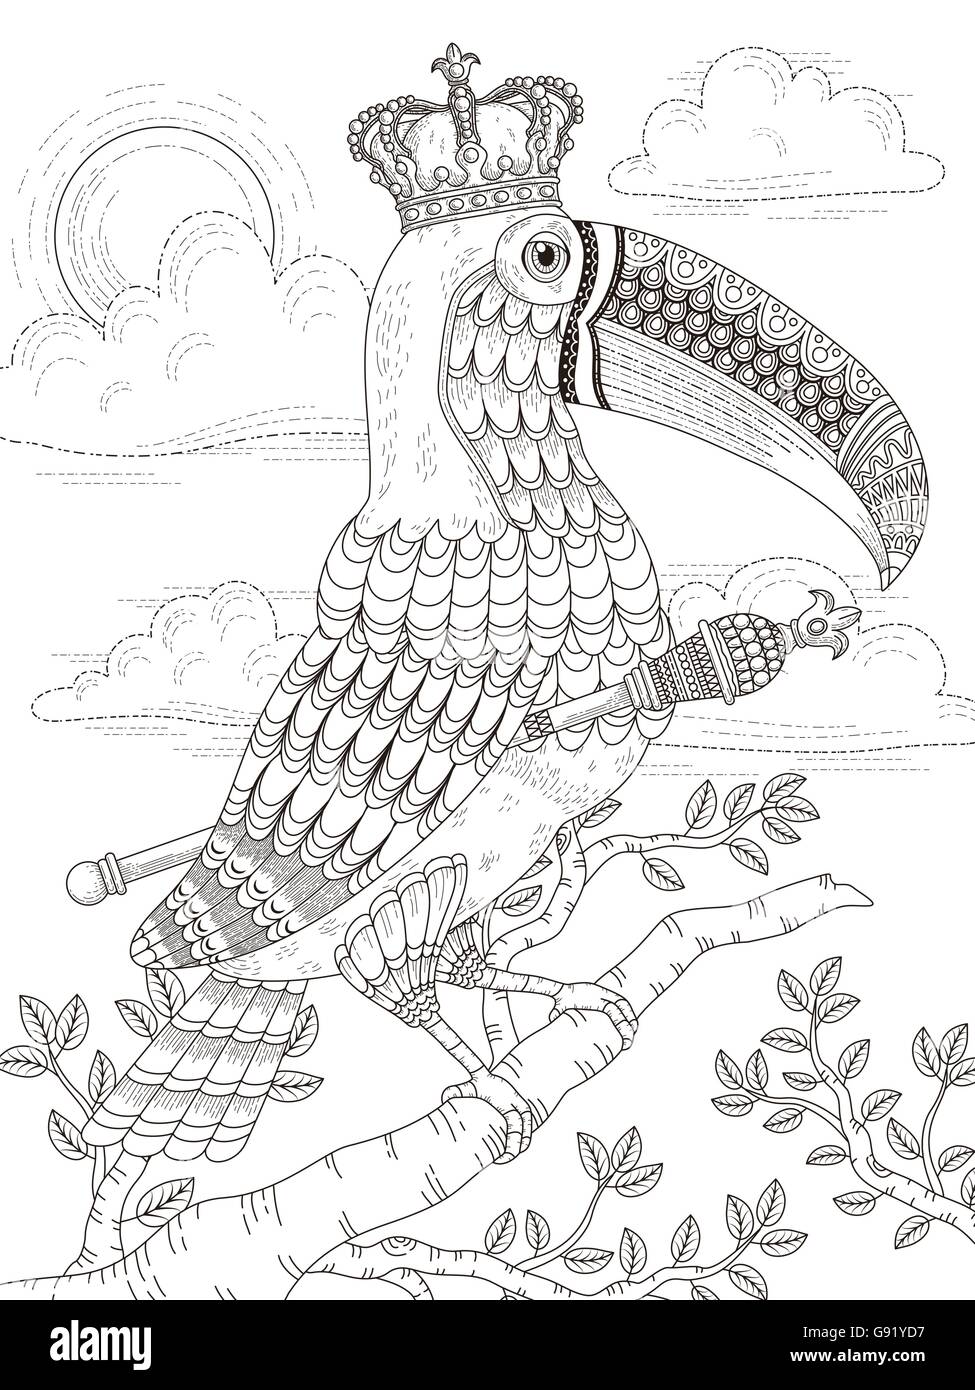 adult coloring page with solemn king toucan Stock Vector